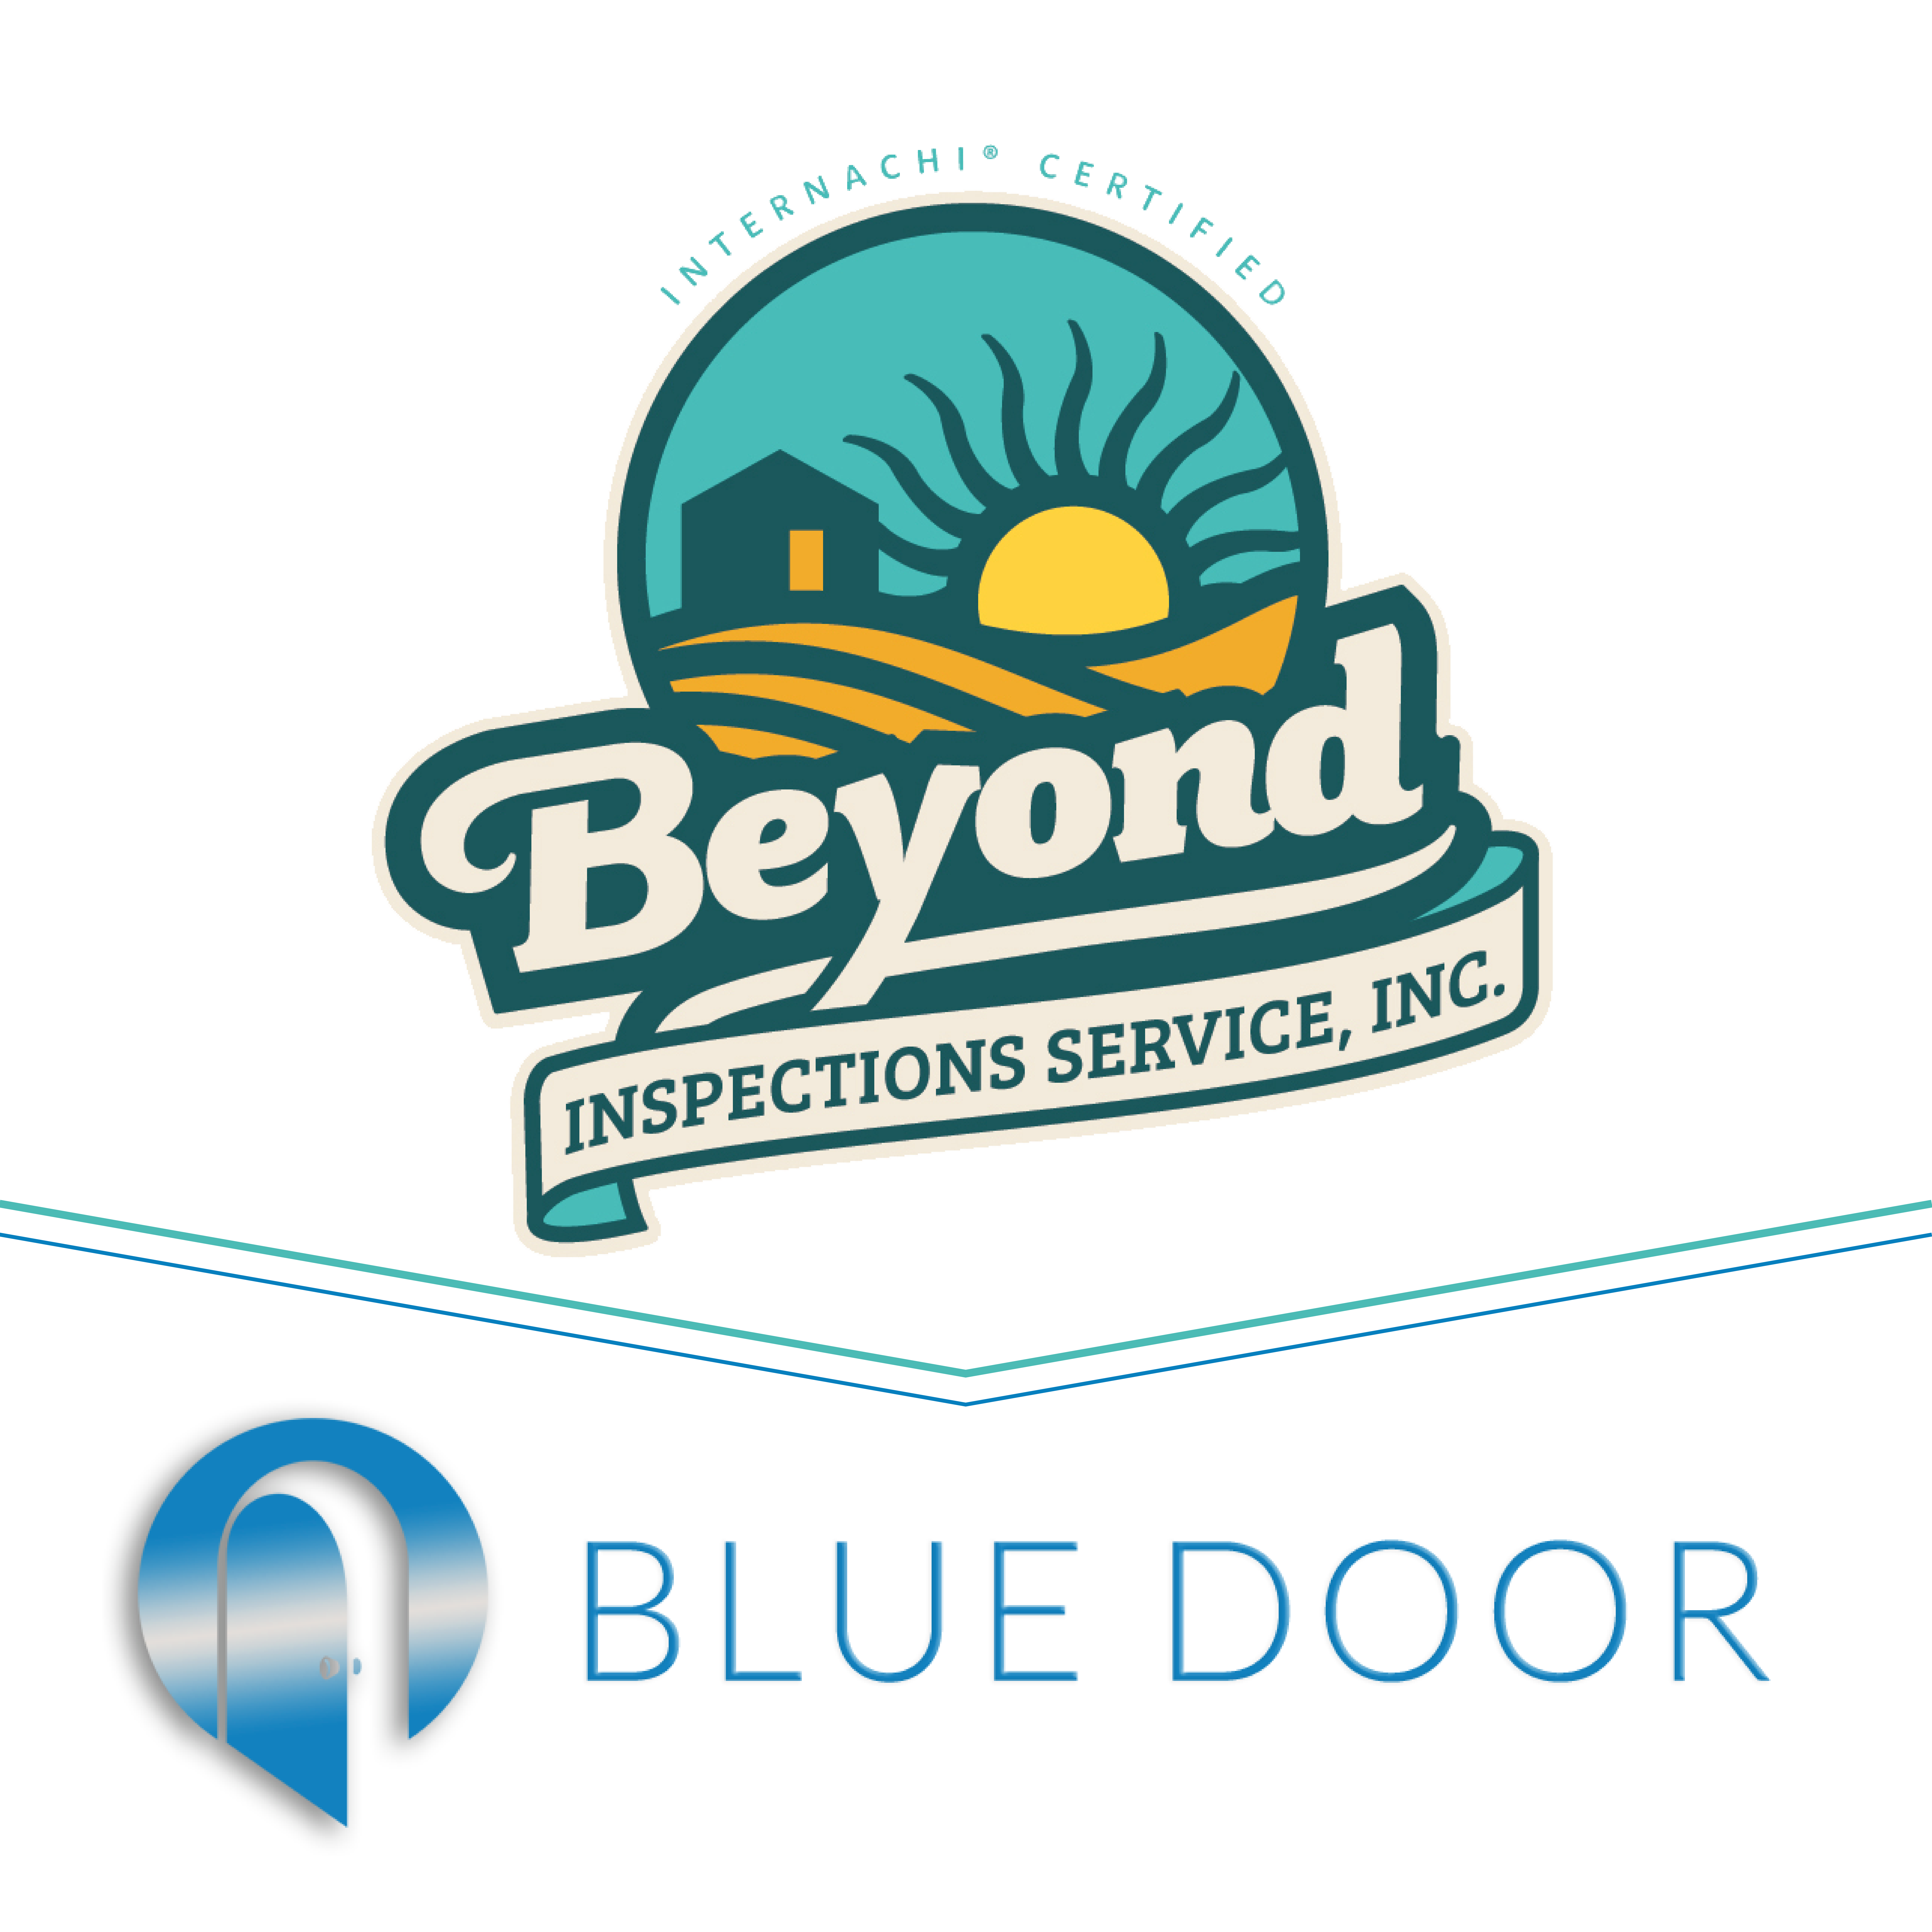 Beyond Inspections Services logo